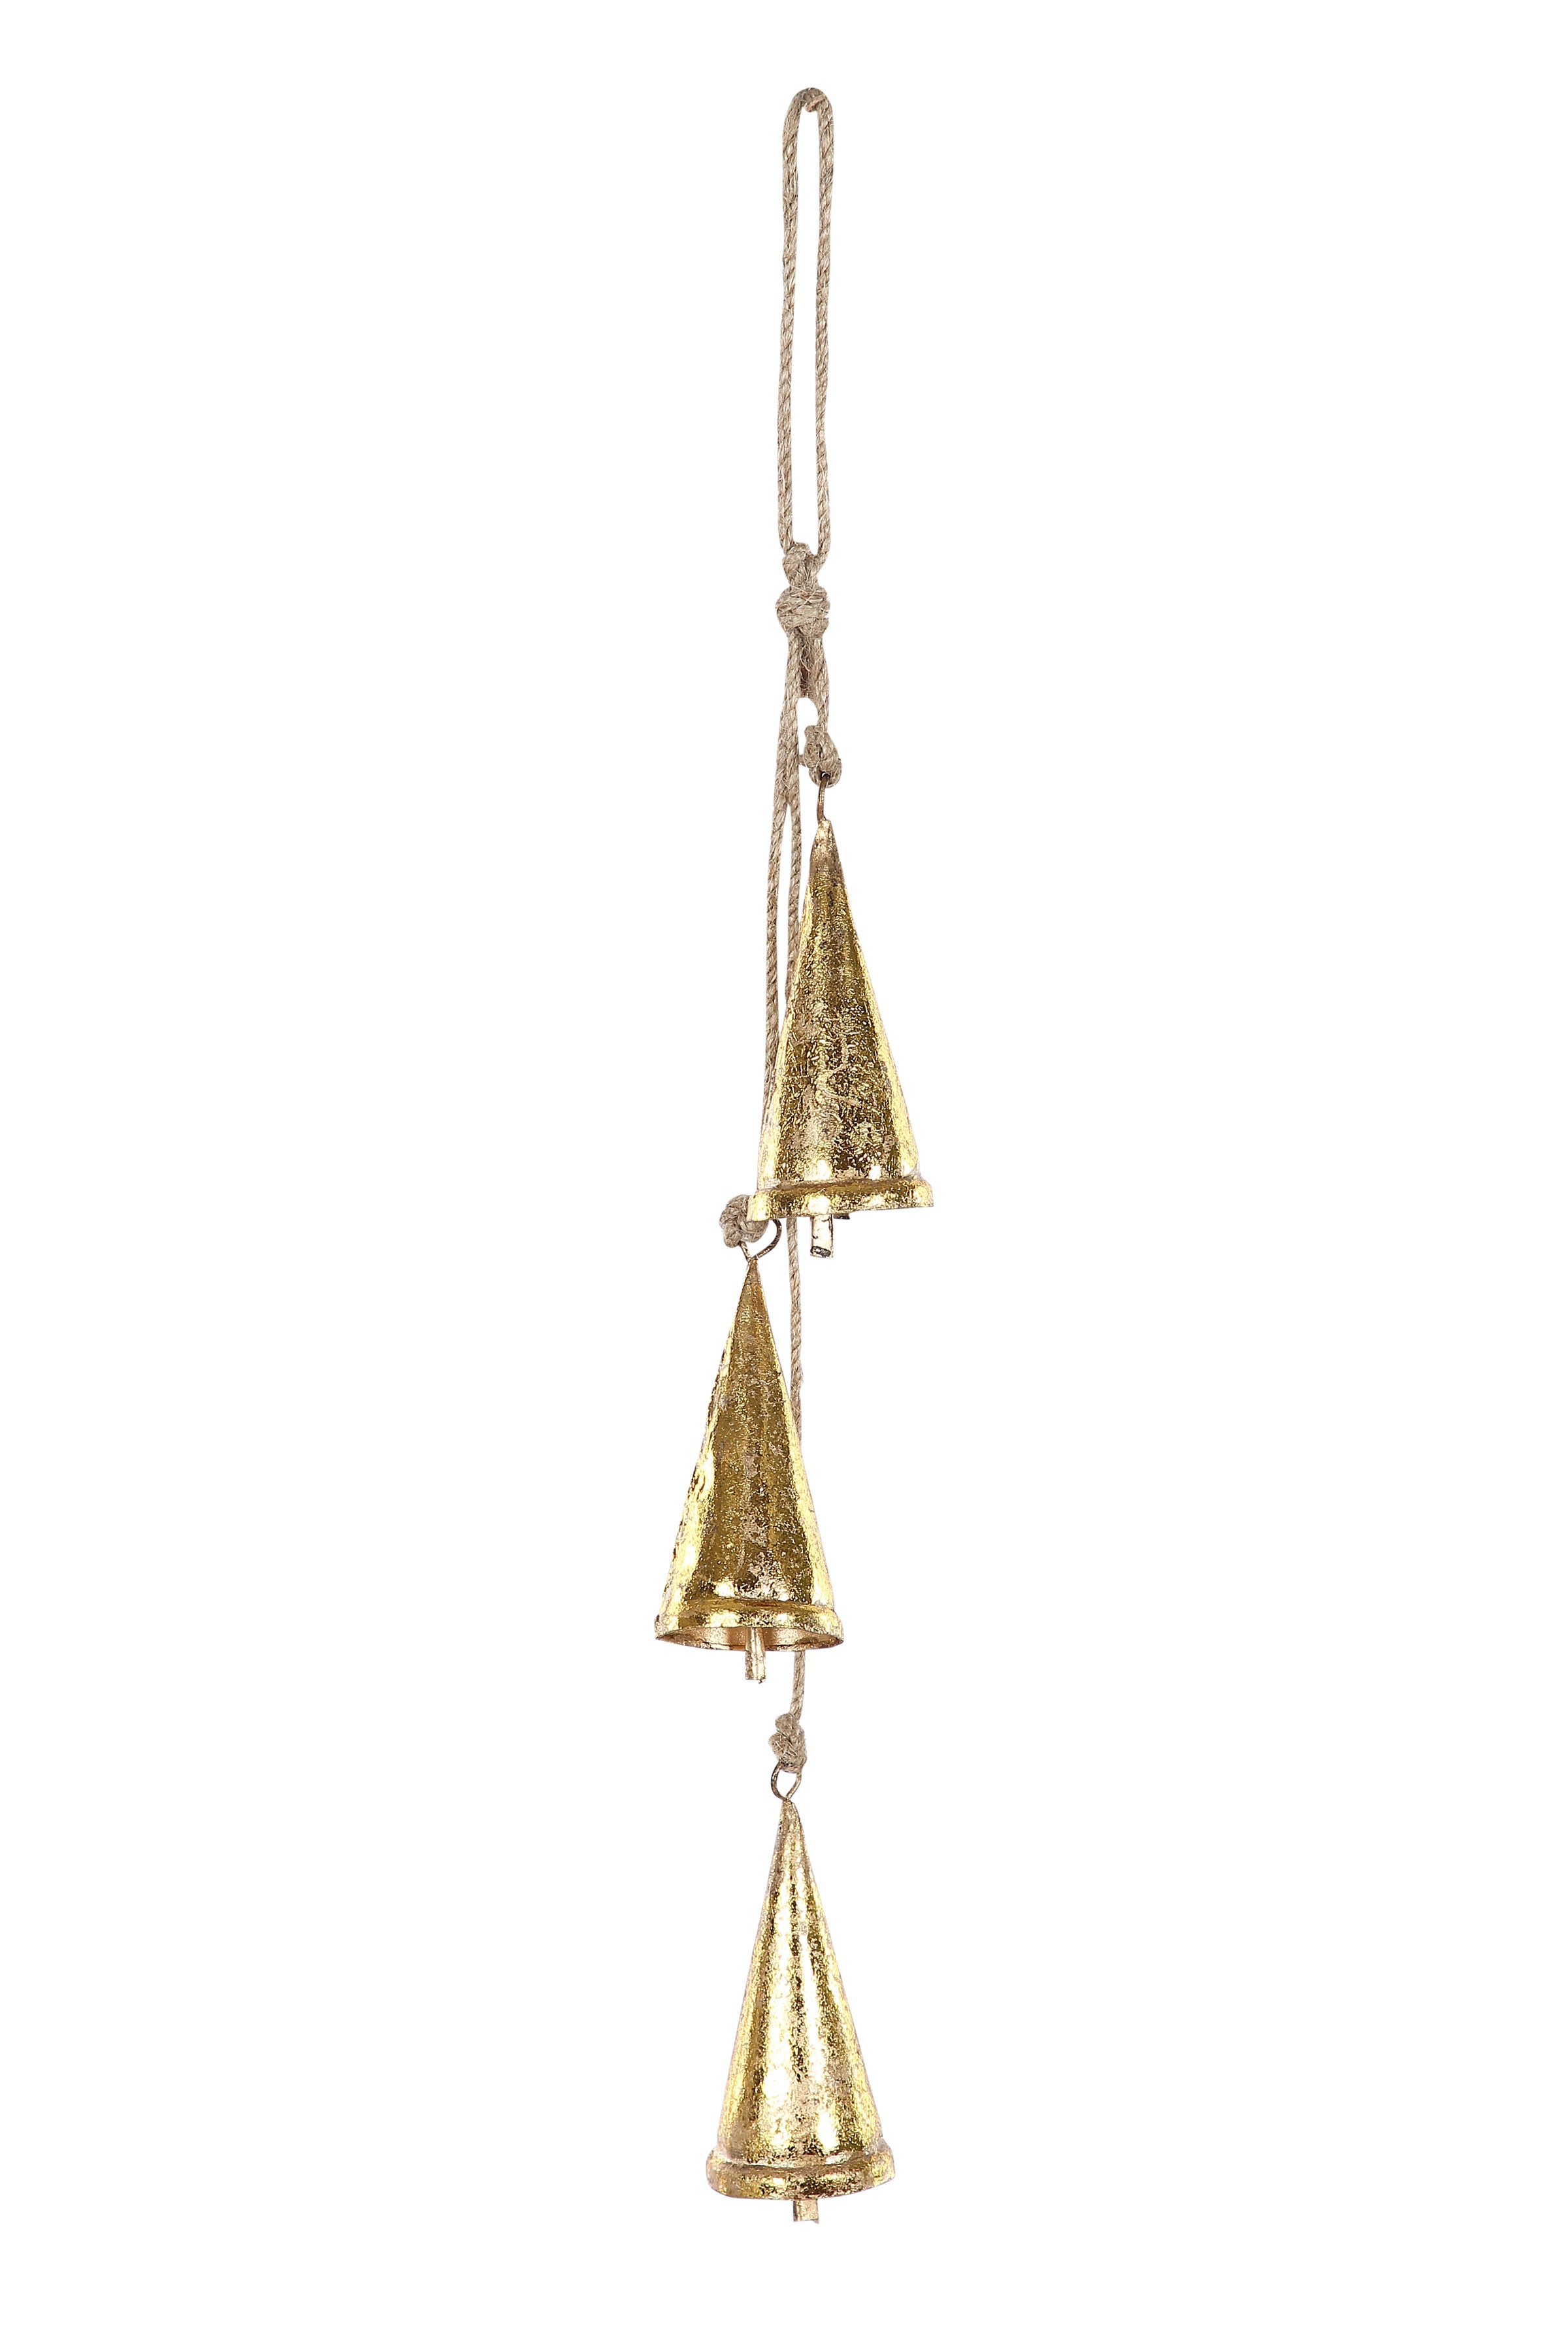 Iron Bells Christmas Decor with Jute Strings -18.5inch